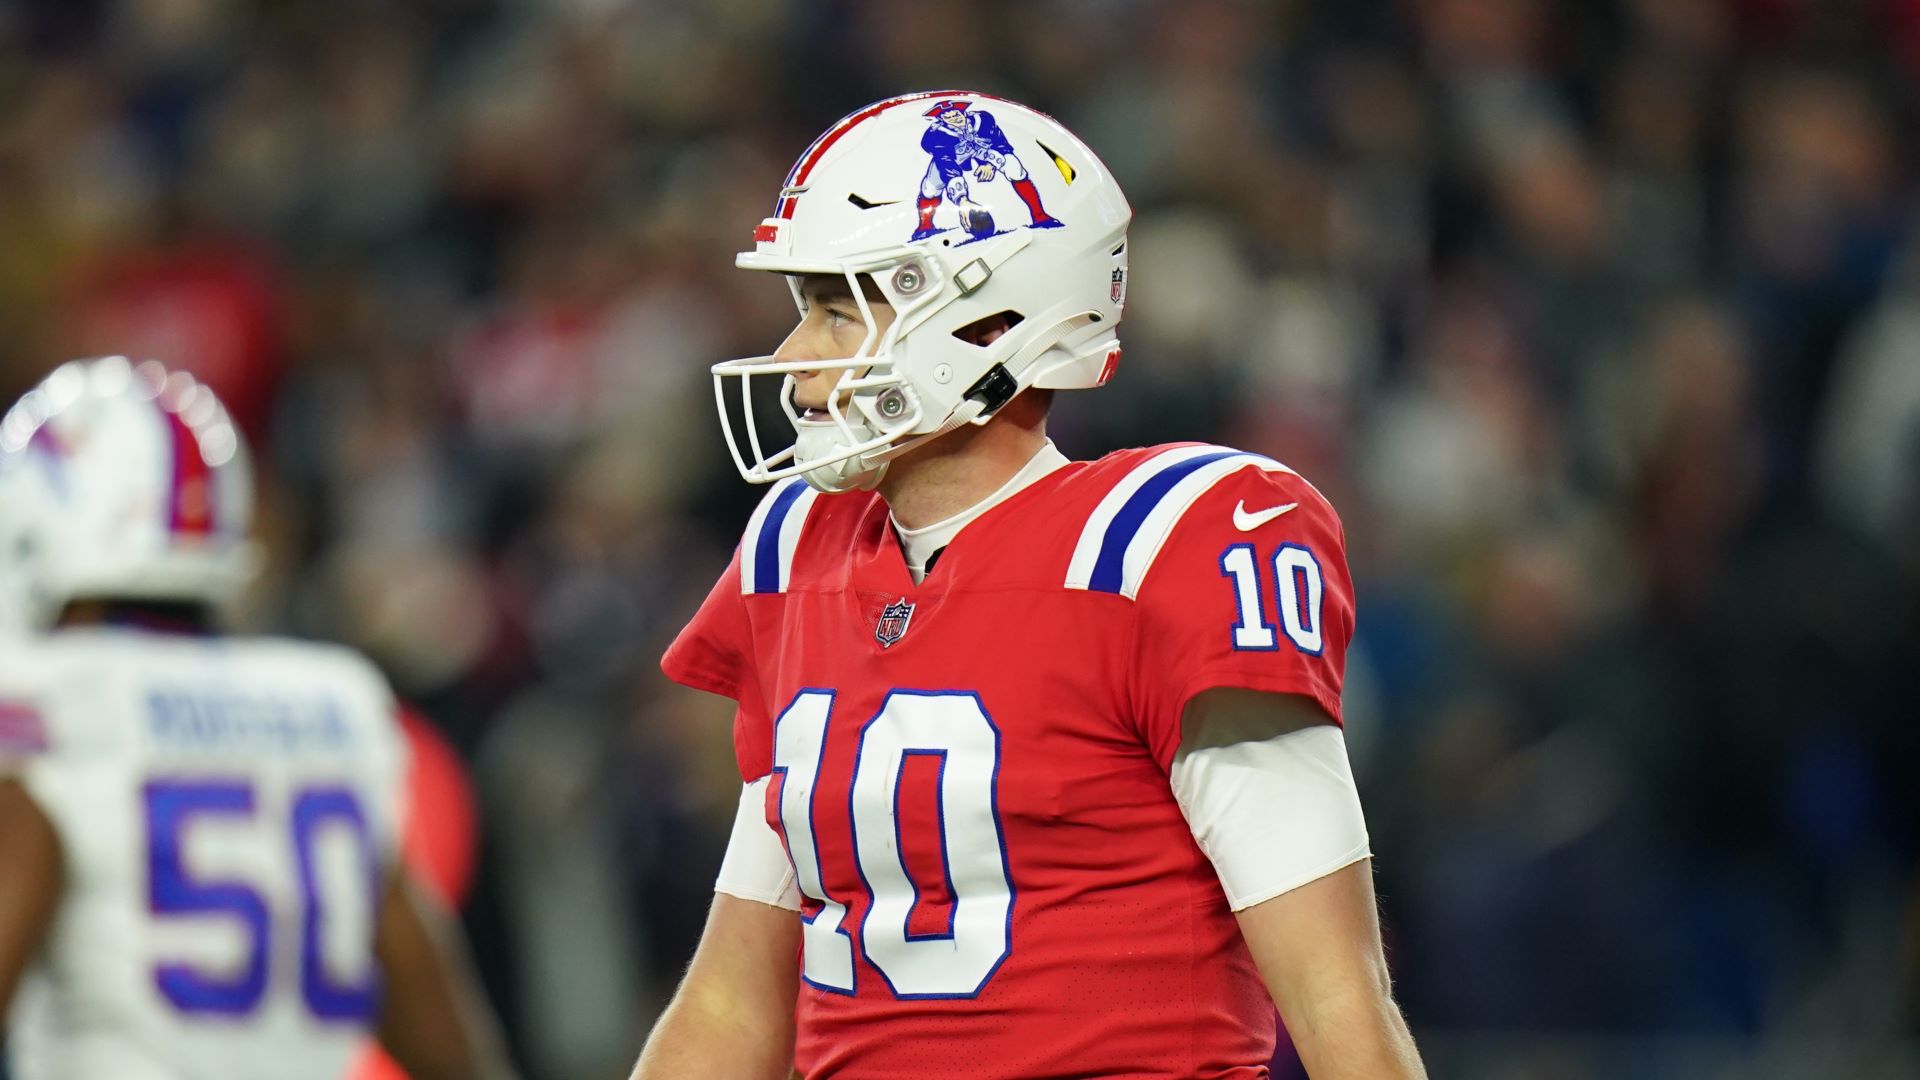 Mac Jones Posts Farewell Message To Patriots With Trade To Jaguars
Official